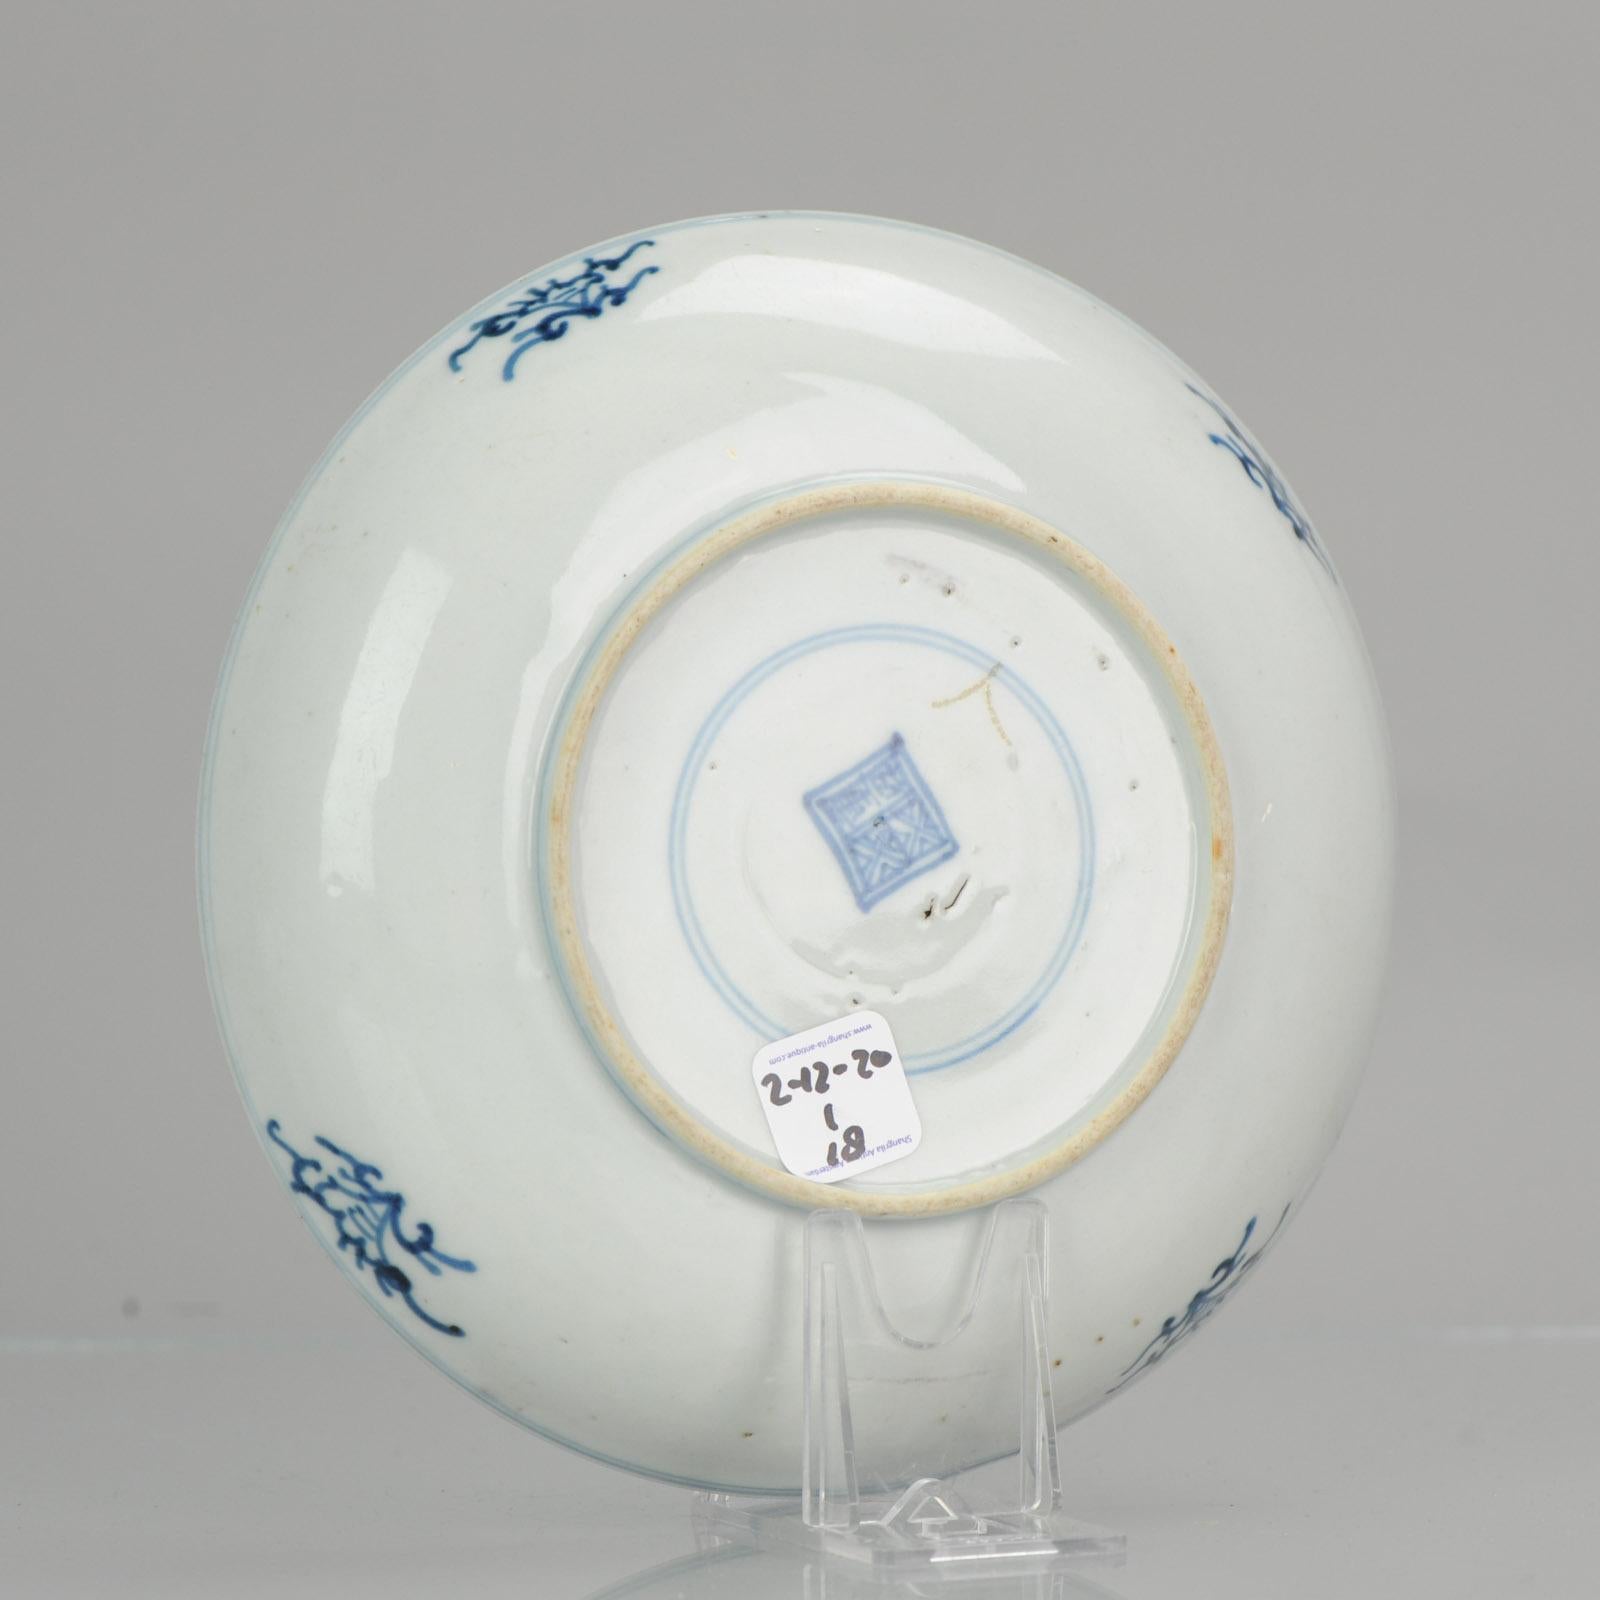 A very nicely and rare decorated plate. Transitional / Early Qing, late 17th century.

Decorated with lotus pond

Condition
1 line, 2 small glaze line to rim (1 only visible outside, 1 only inside). Size 198 x 38mm

Period
17th century